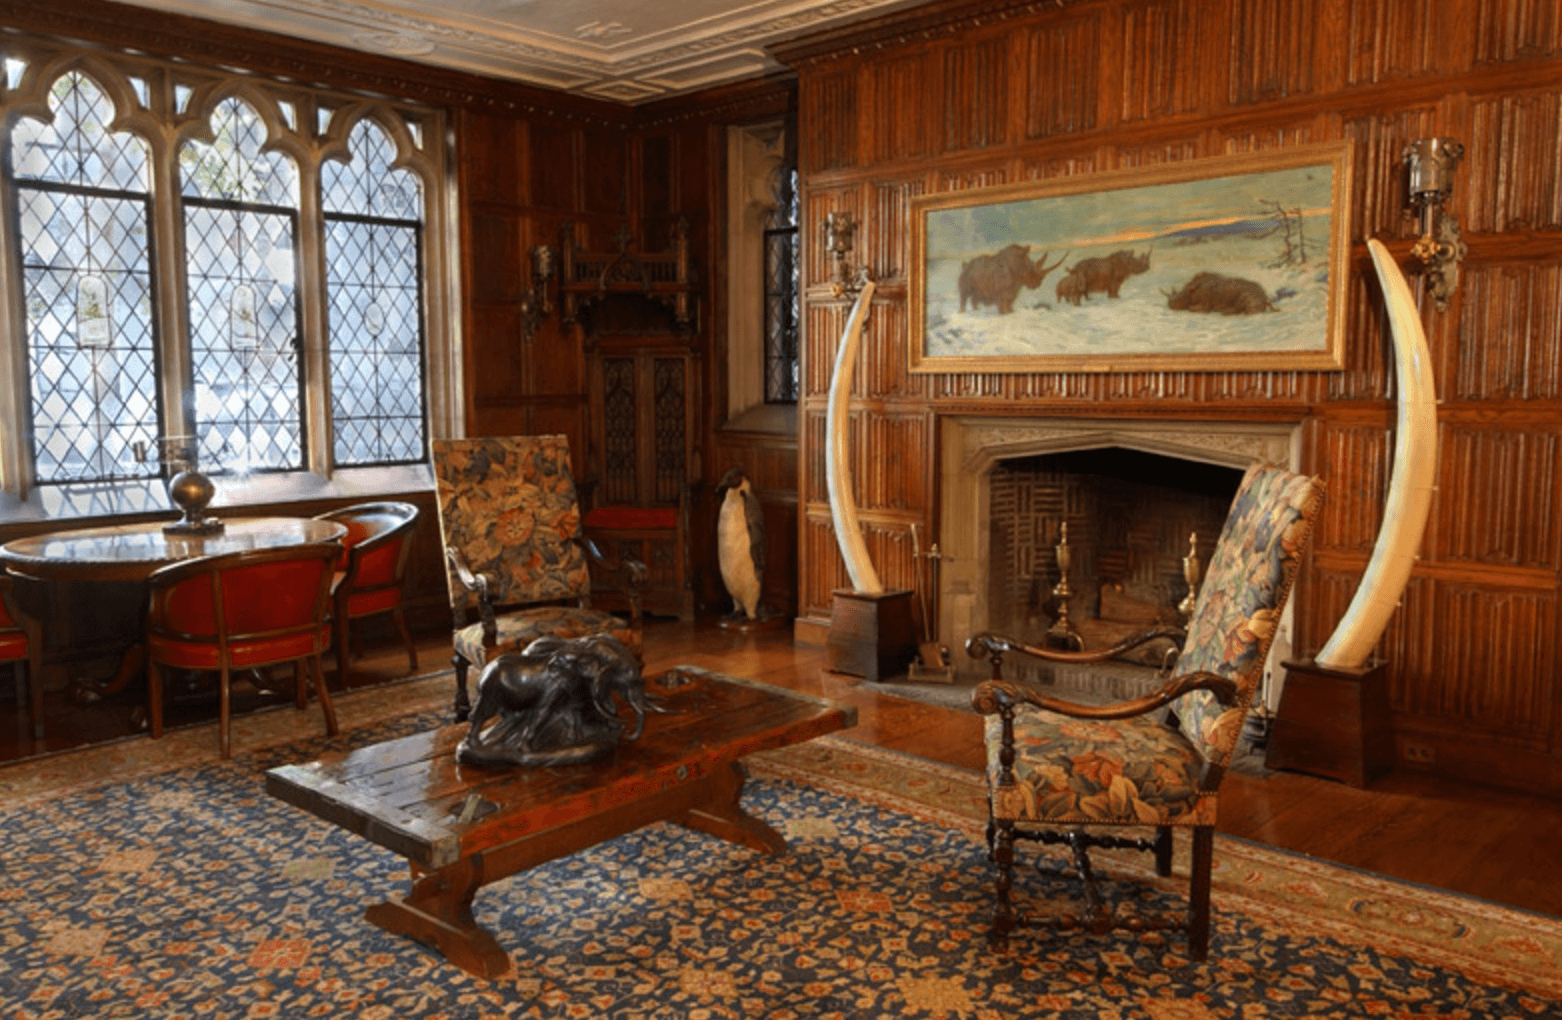 Curiosities-Our-Bucket-Lists-5-Offbeat-Museums-NYC-Explorers-Club-Fireplace